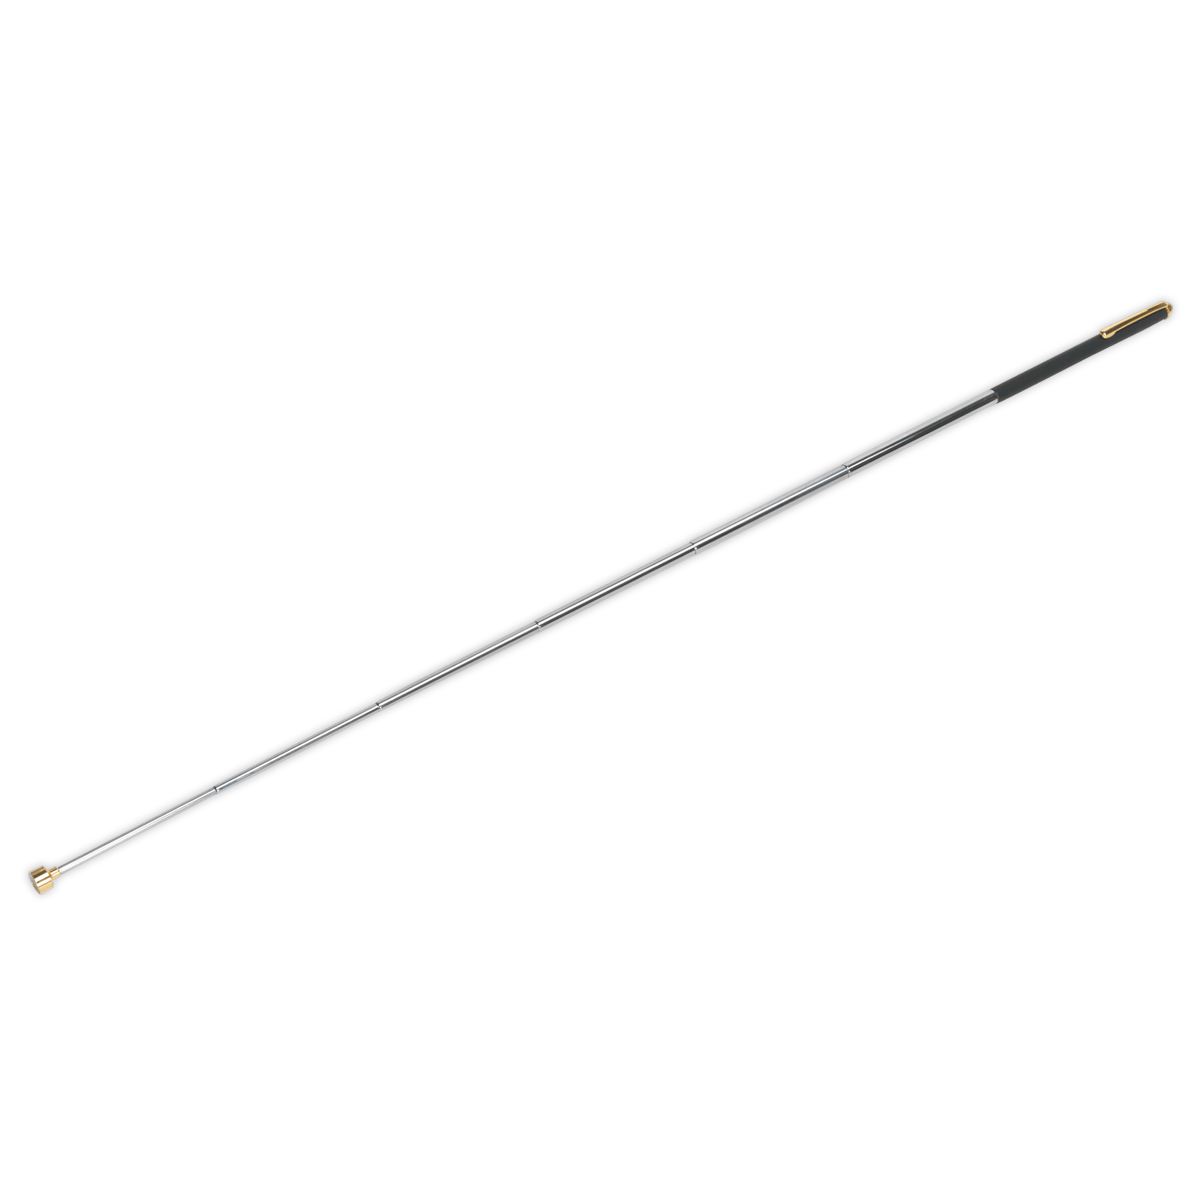 Sealey Telescopic Magnetic Pick-Up Tool 1.5kg Capacity AK6511 | Metal bodied pick-up tool with gold coloured cap, pocket-clip and magnetic retainer. | toolforce.ie